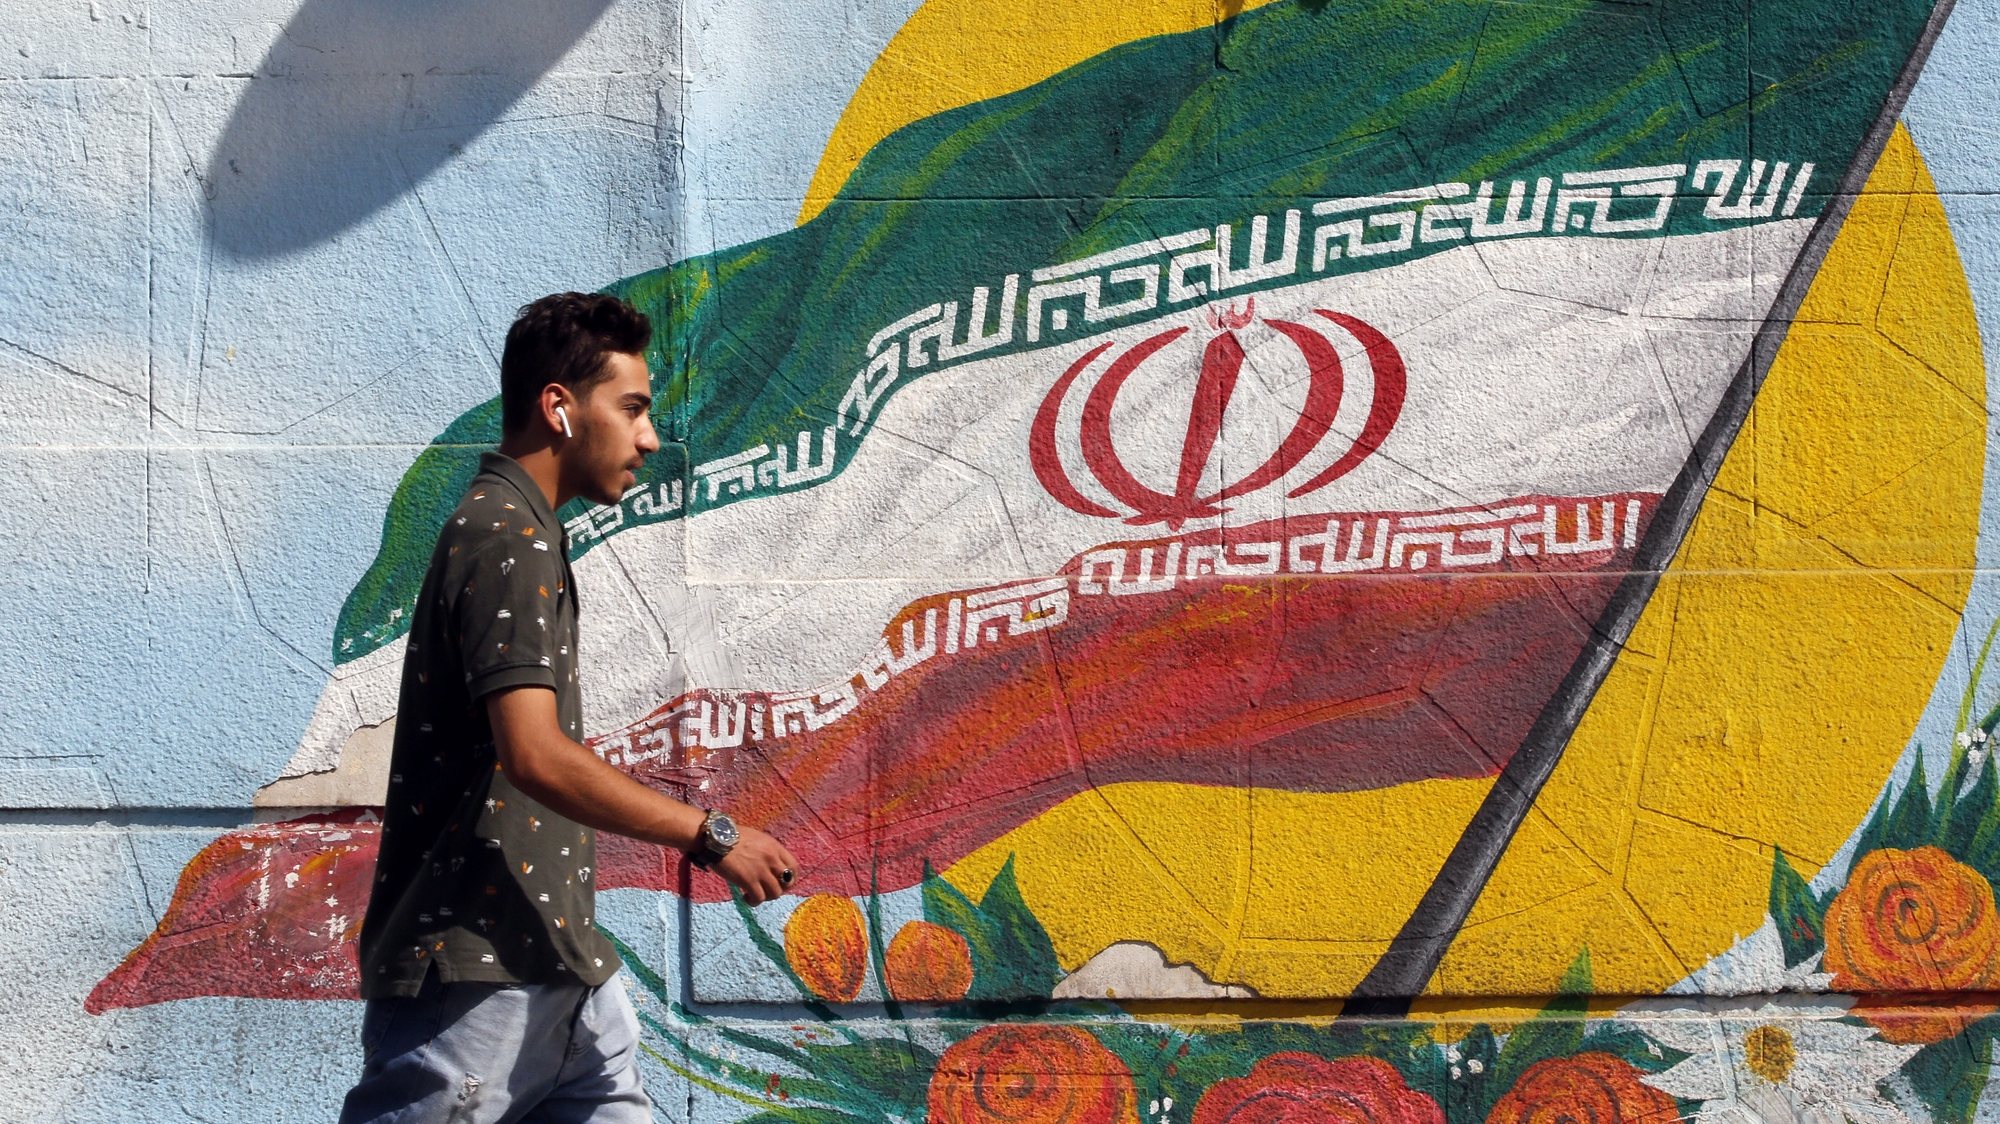 epa10209333 An Iranian boy walks next to a wall painting of Iran&#039;s national flag in a street, in Tehran, Iran, 27 September 2022. Iran has been facing many anti-government protests following death of Masha Amini, a 22 year old girl, who was detained on 13 September by the police unit responsible for enforcing Iran&#039;s strict dress code for women. Amini was declared dead on 16 September, after she spent 3 days in a coma. Protests first broke out in Saqez, hometown of Amini, during her funeral on 17 September.  EPA/ABEDIN TAHERKENAREH